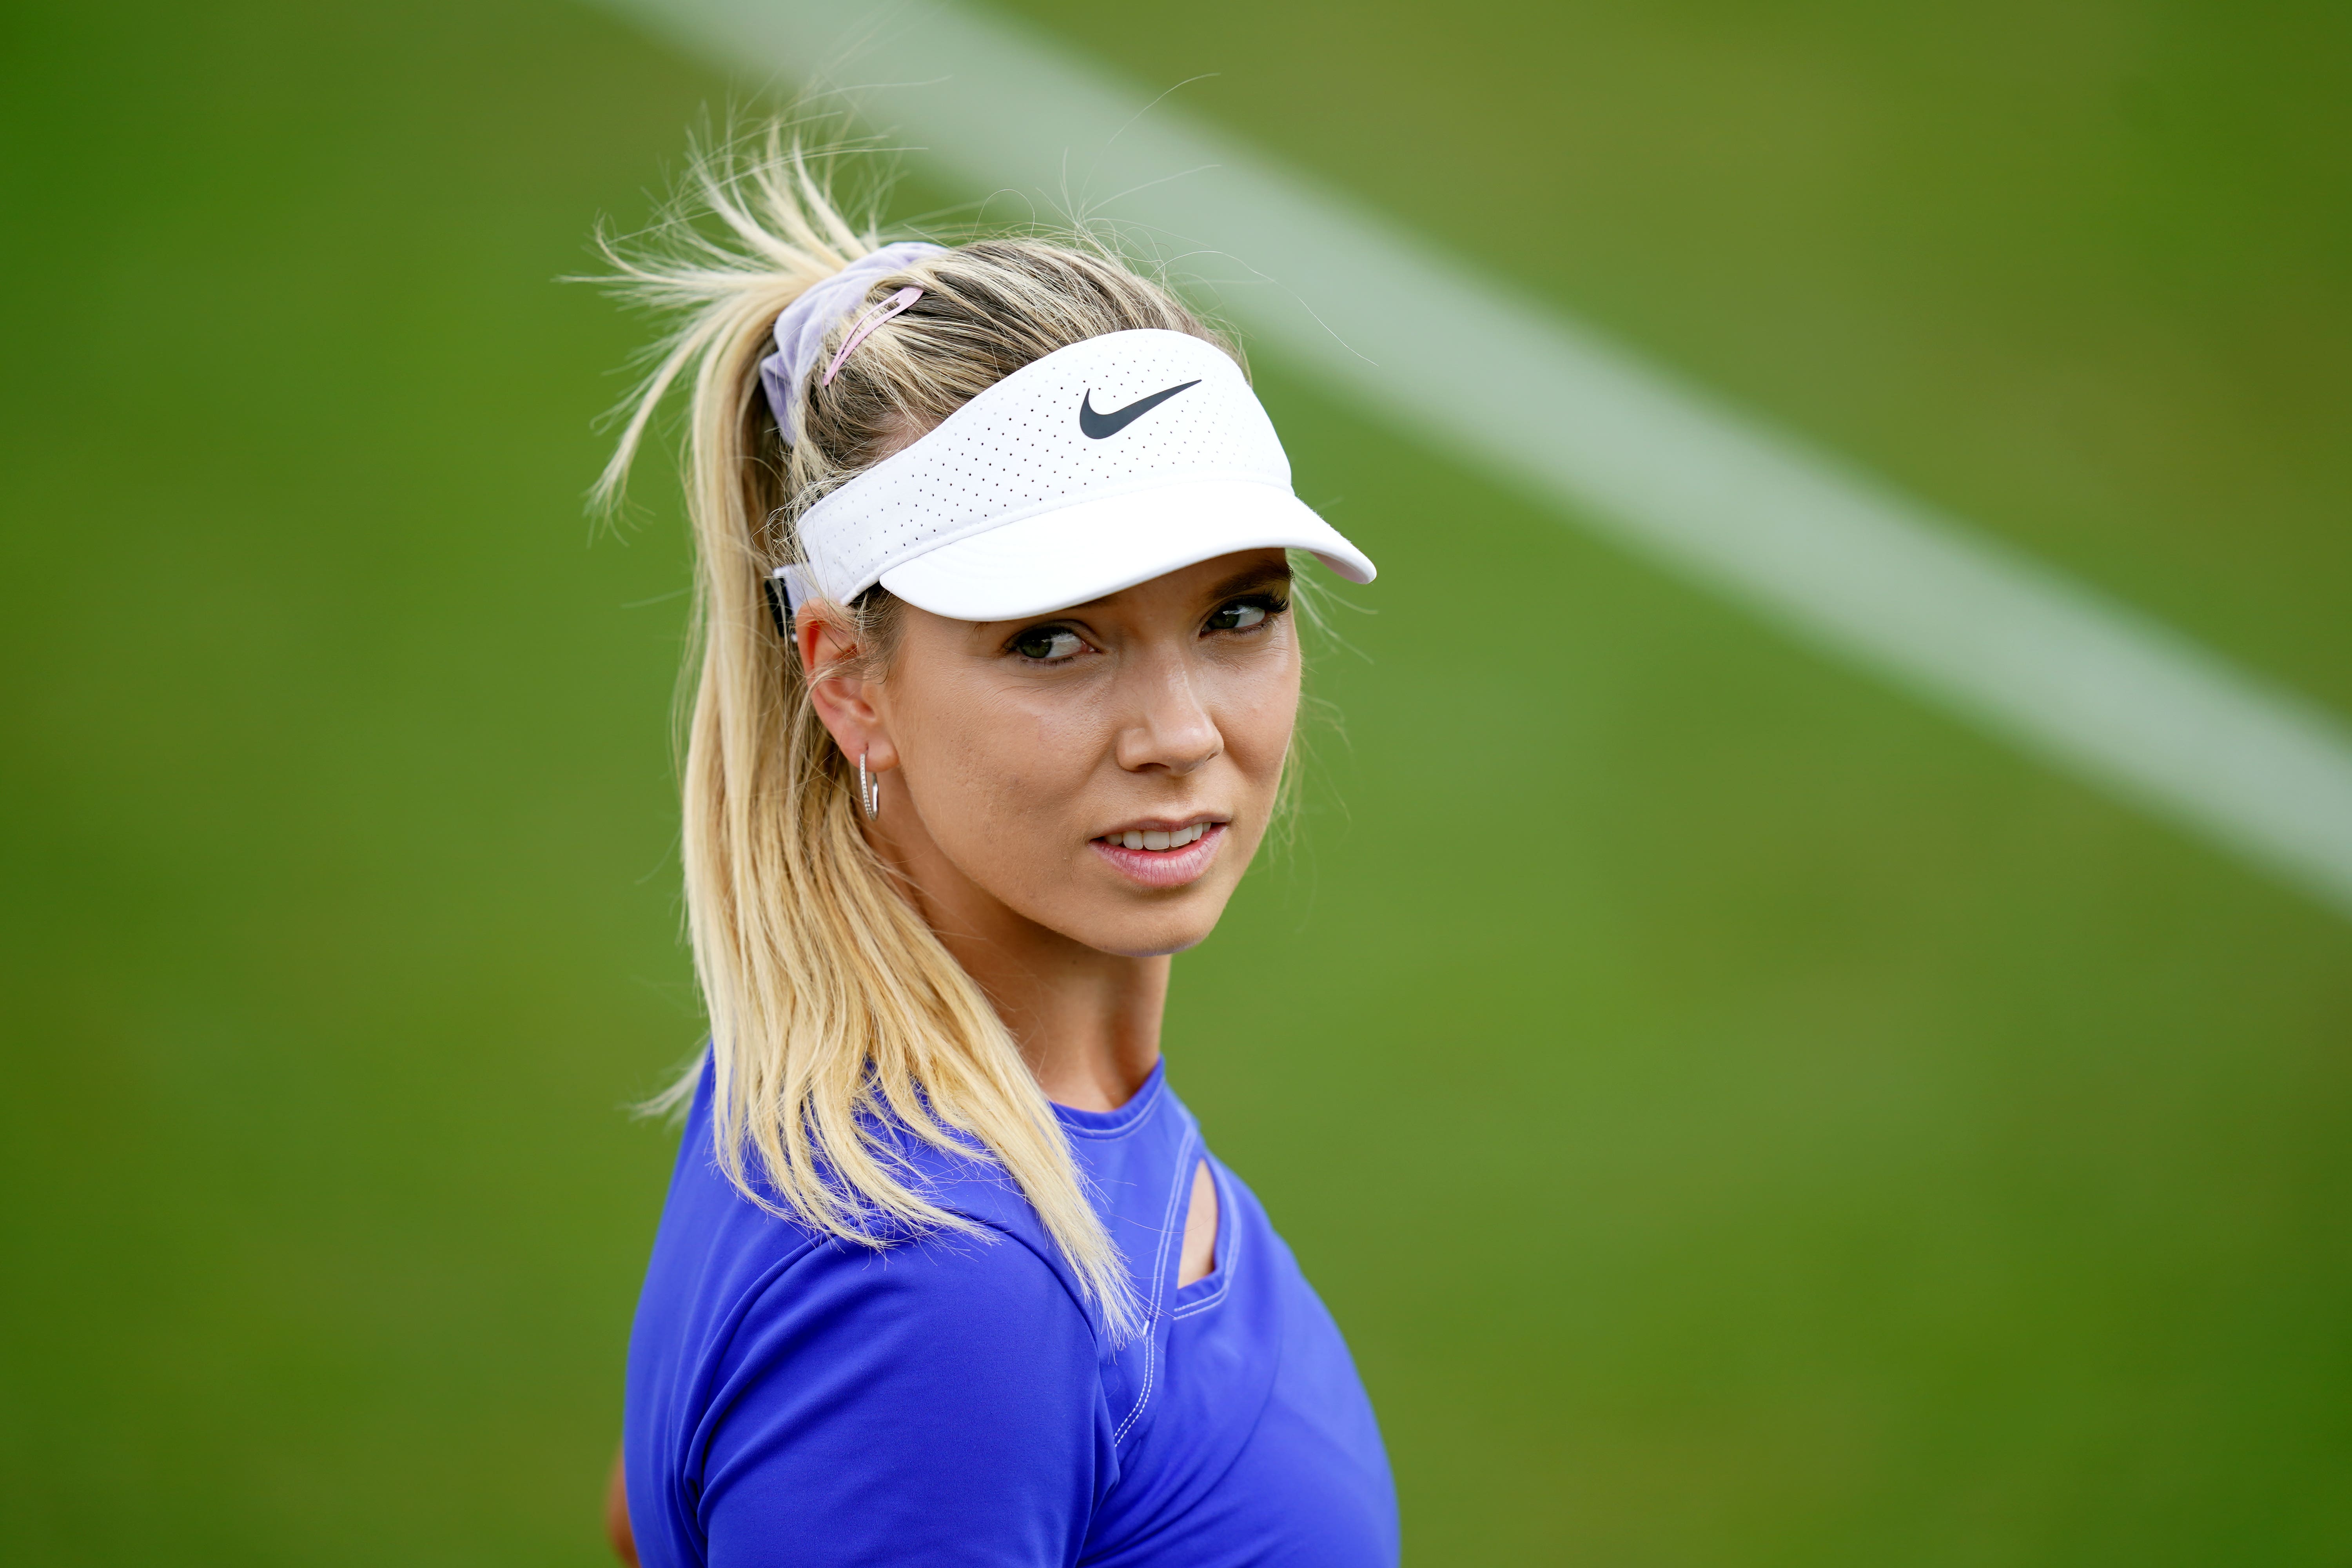 As Katie Boulter takes Wimbledon by storm, we look at her best on-court fashion so far The Independent